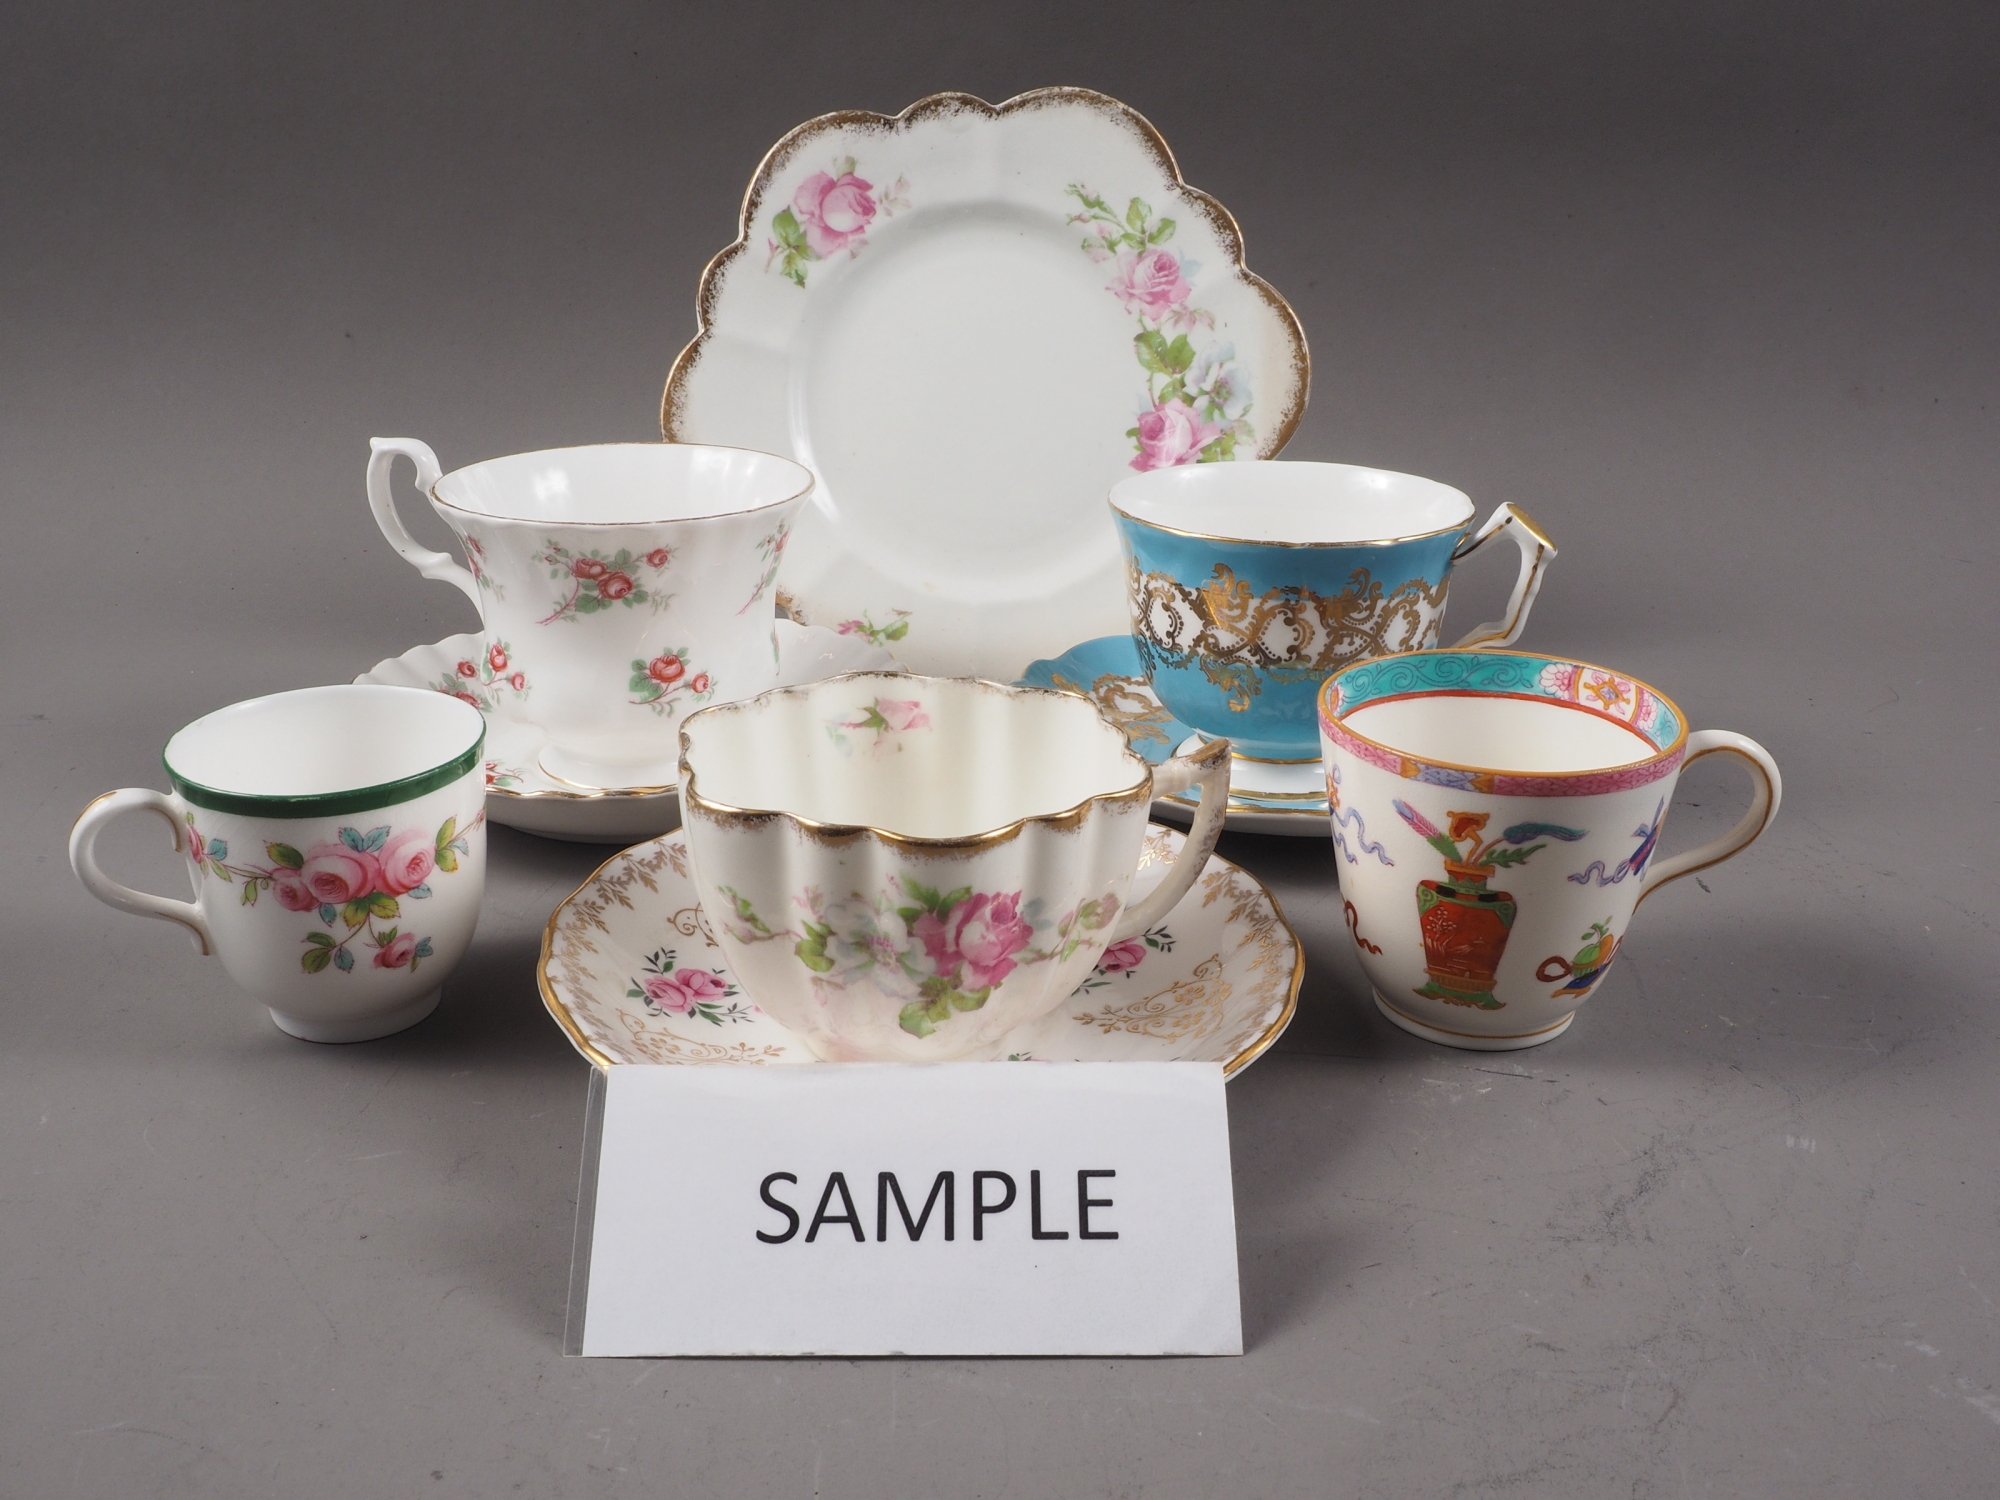 An Aynsley 1215 pattern teacup and saucer, a pair of Royal Worcester coffee cups, various Royal